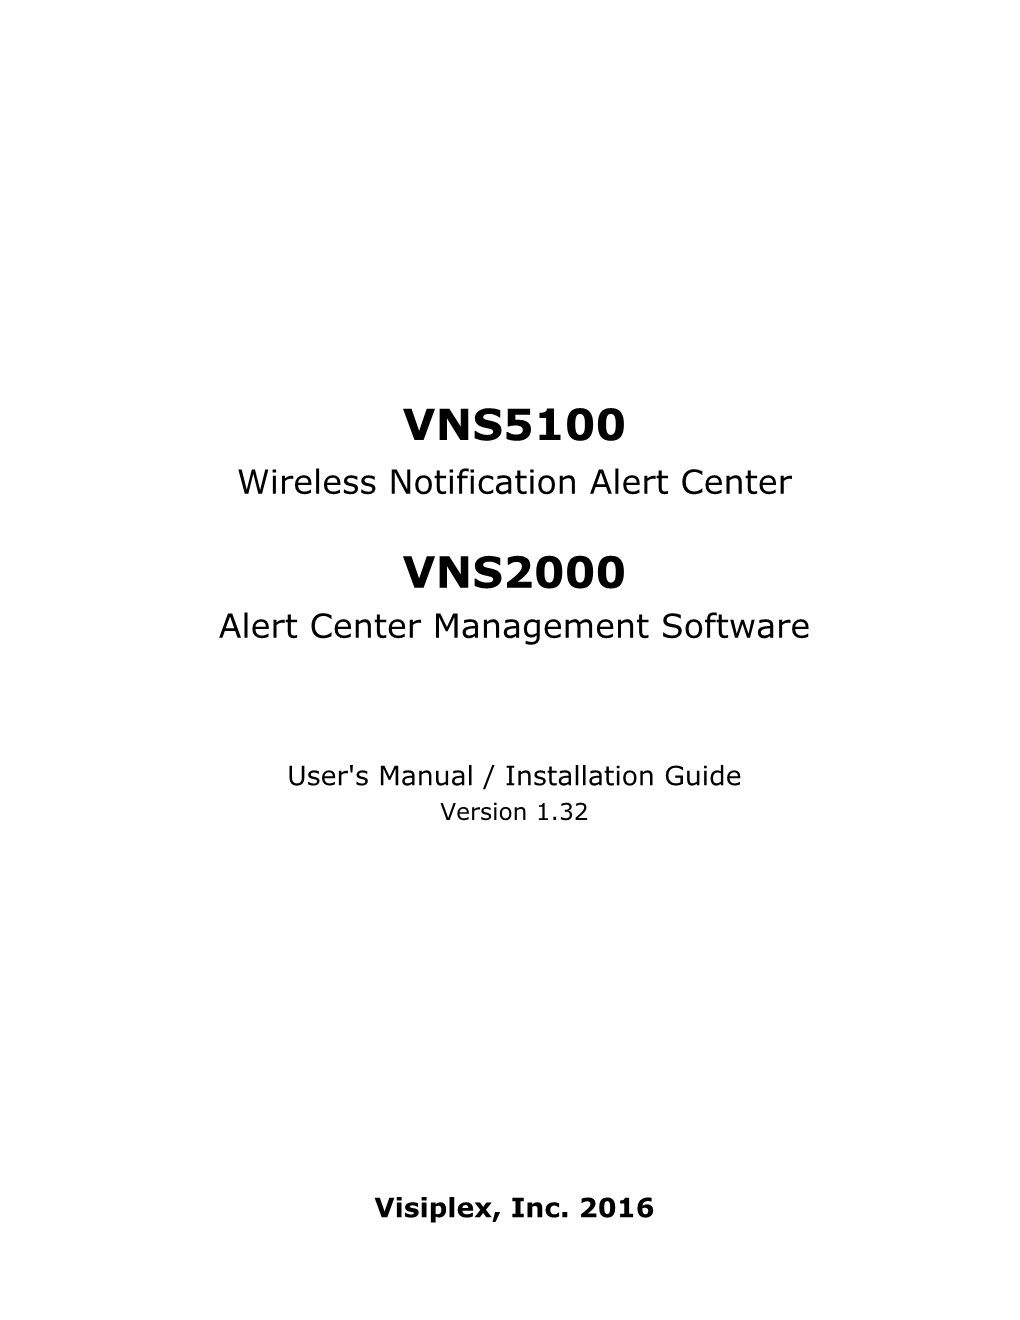 VNS5100/VNS2000 User Guide and Installation Manual